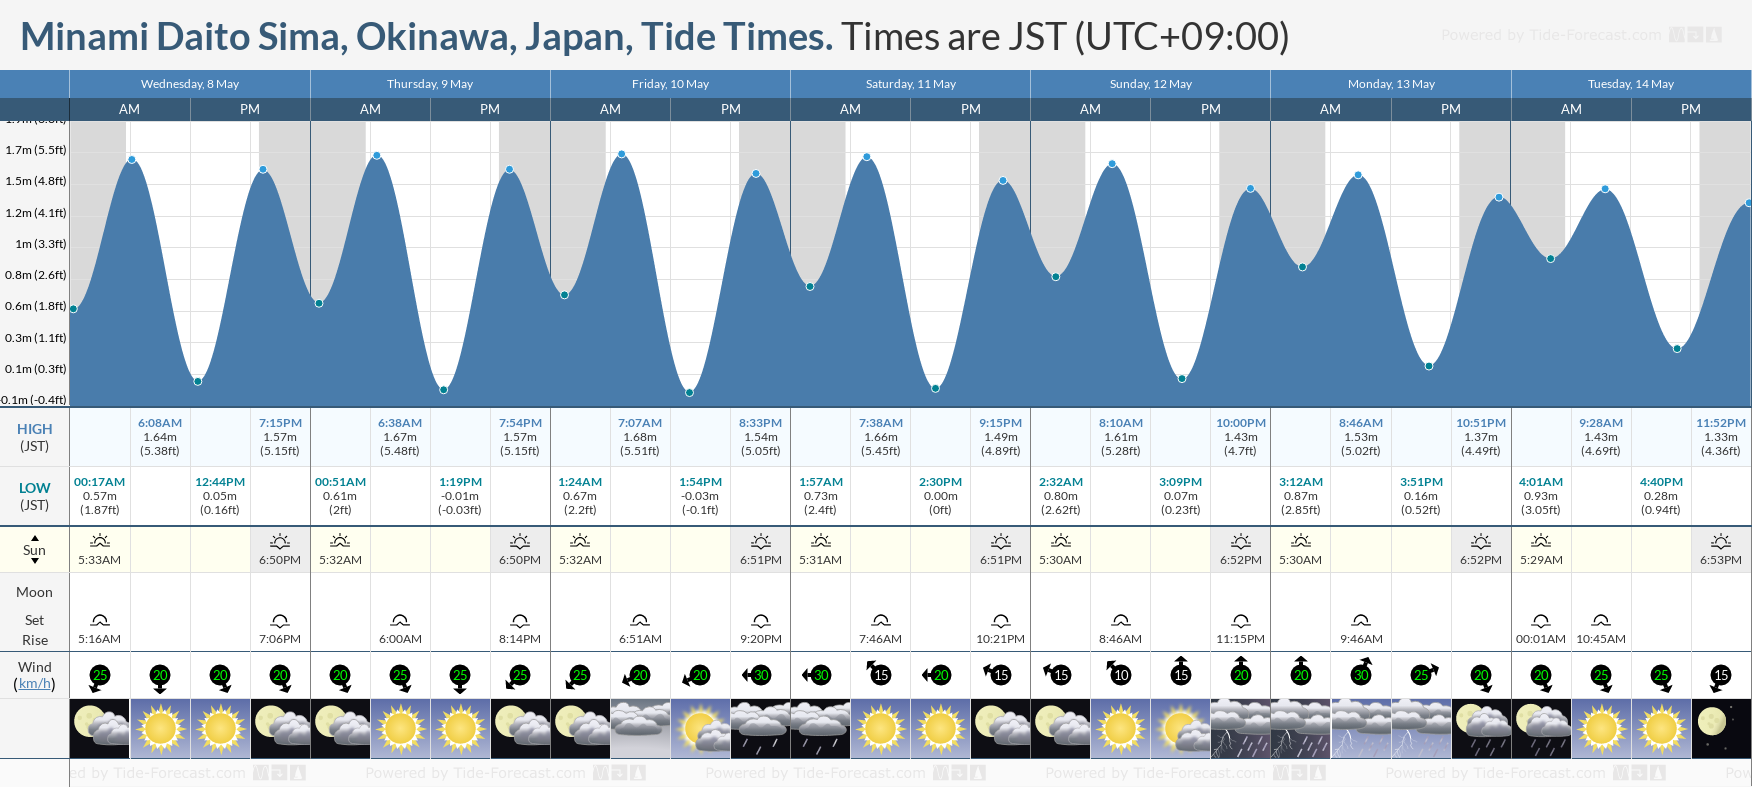 Minami Daito Sima, Okinawa, Japan Tide Chart including high and low tide tide times for the next 7 days